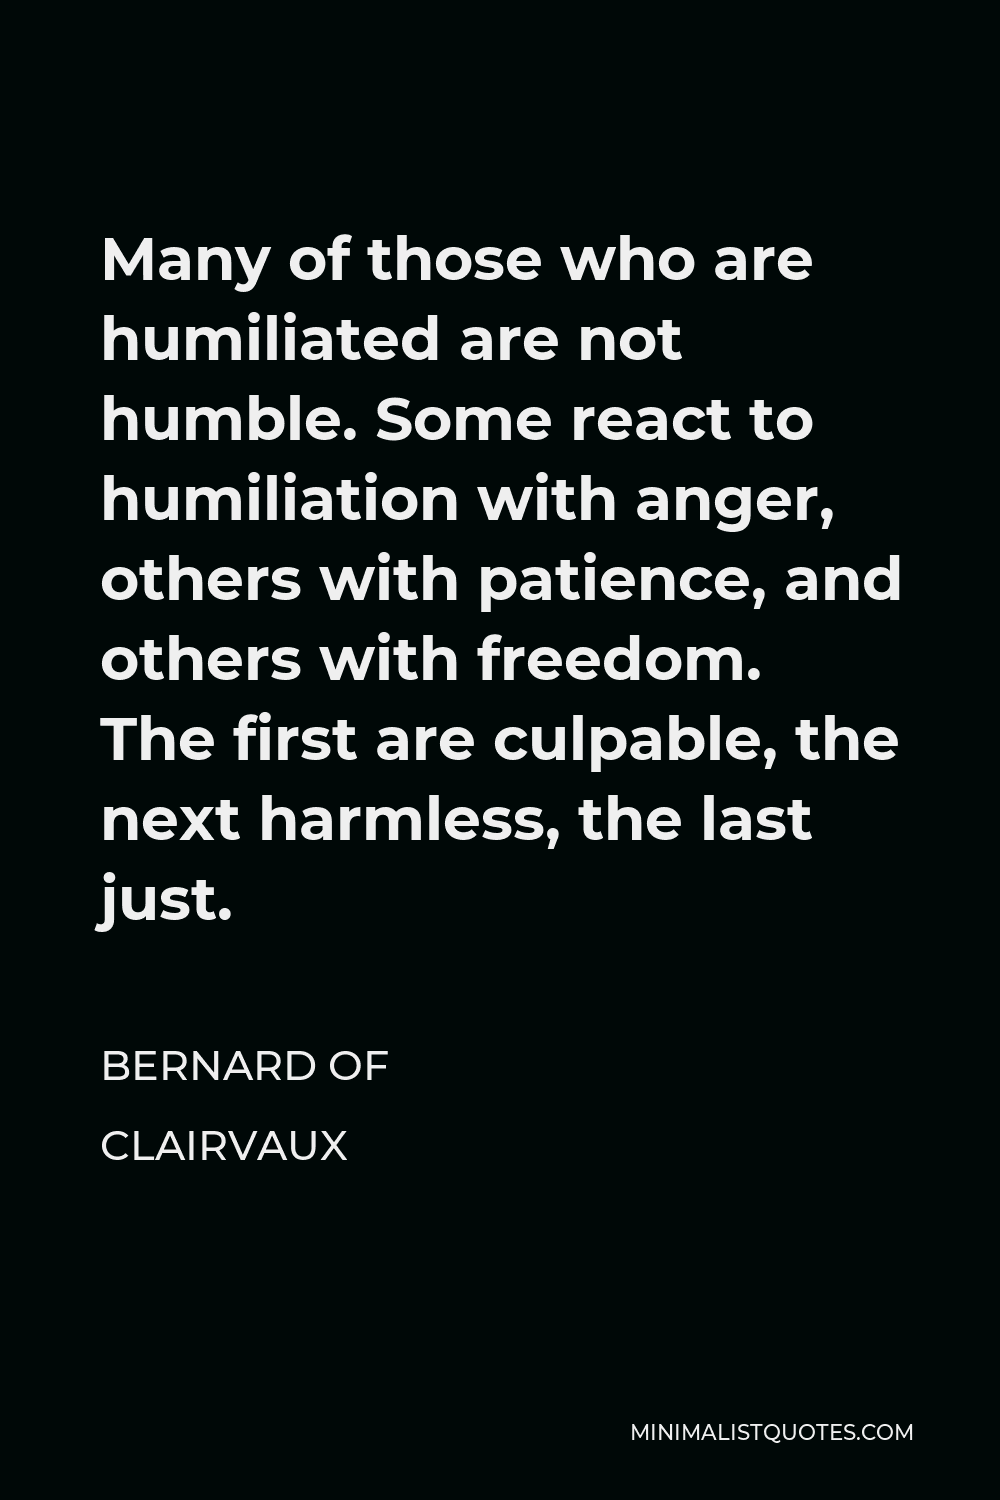 Bernard of Clairvaux Quote - Many of those who are humiliated are not humble. Some react to humiliation with anger, others with patience, and others with freedom. The first are culpable, the next harmless, the last just.